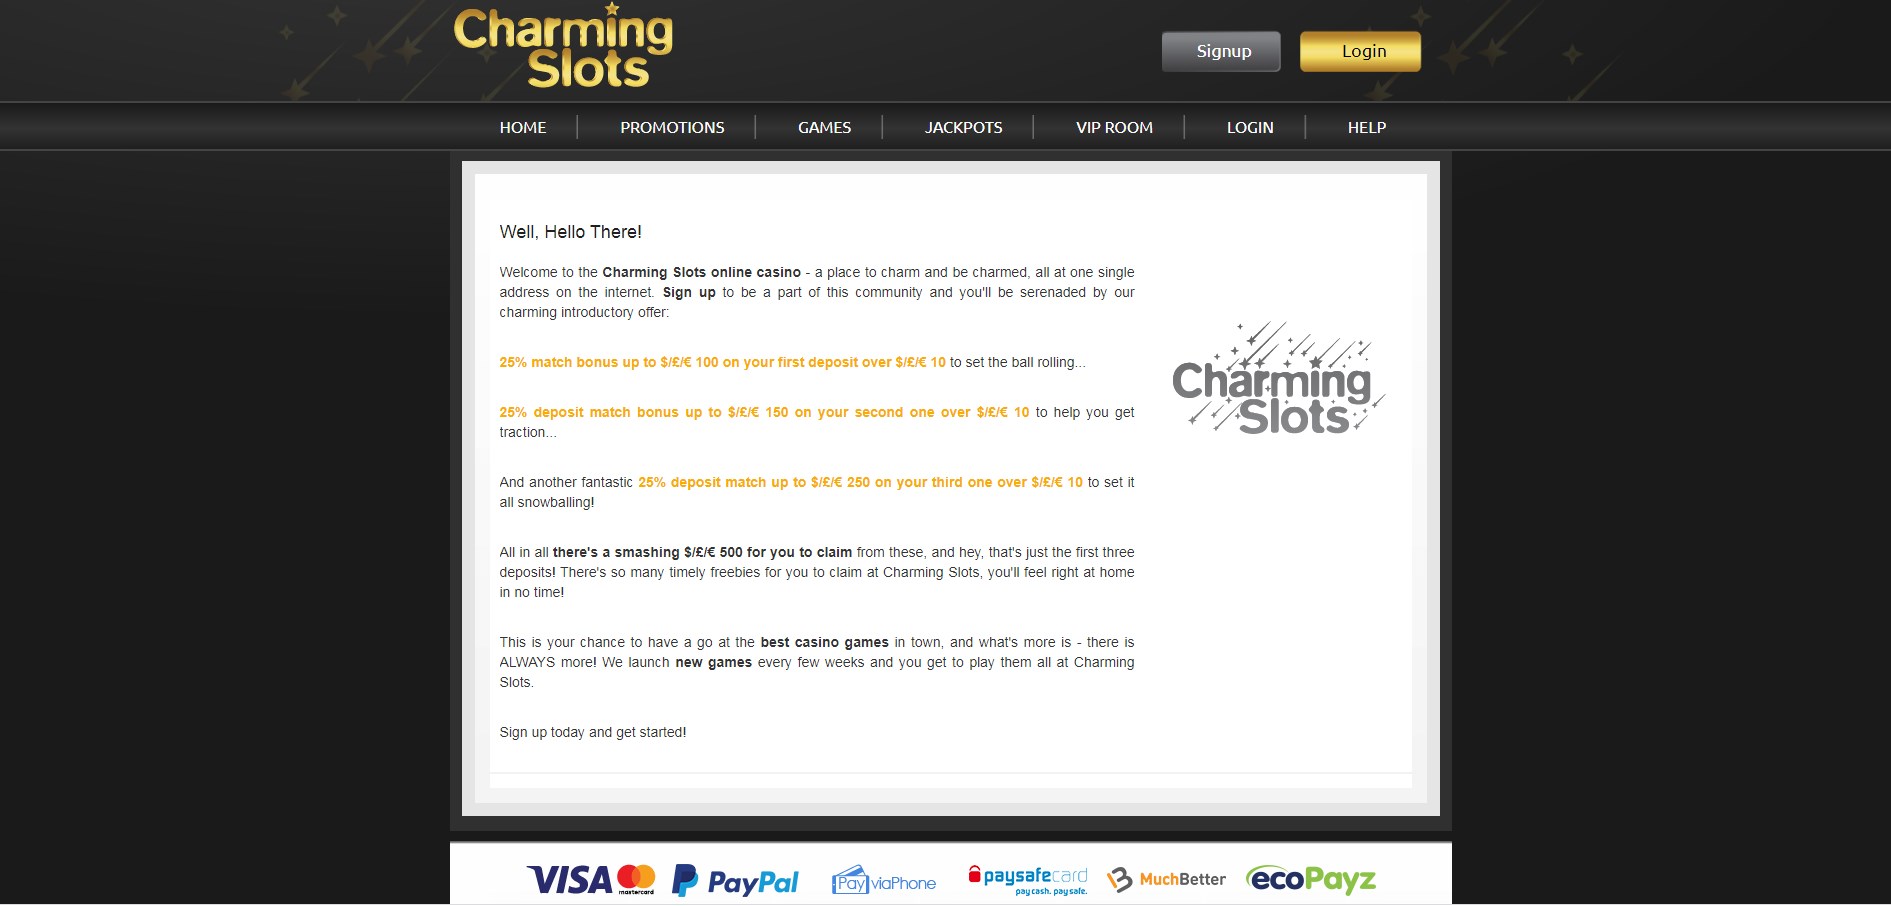 Charming Slots Casino Payment Methods